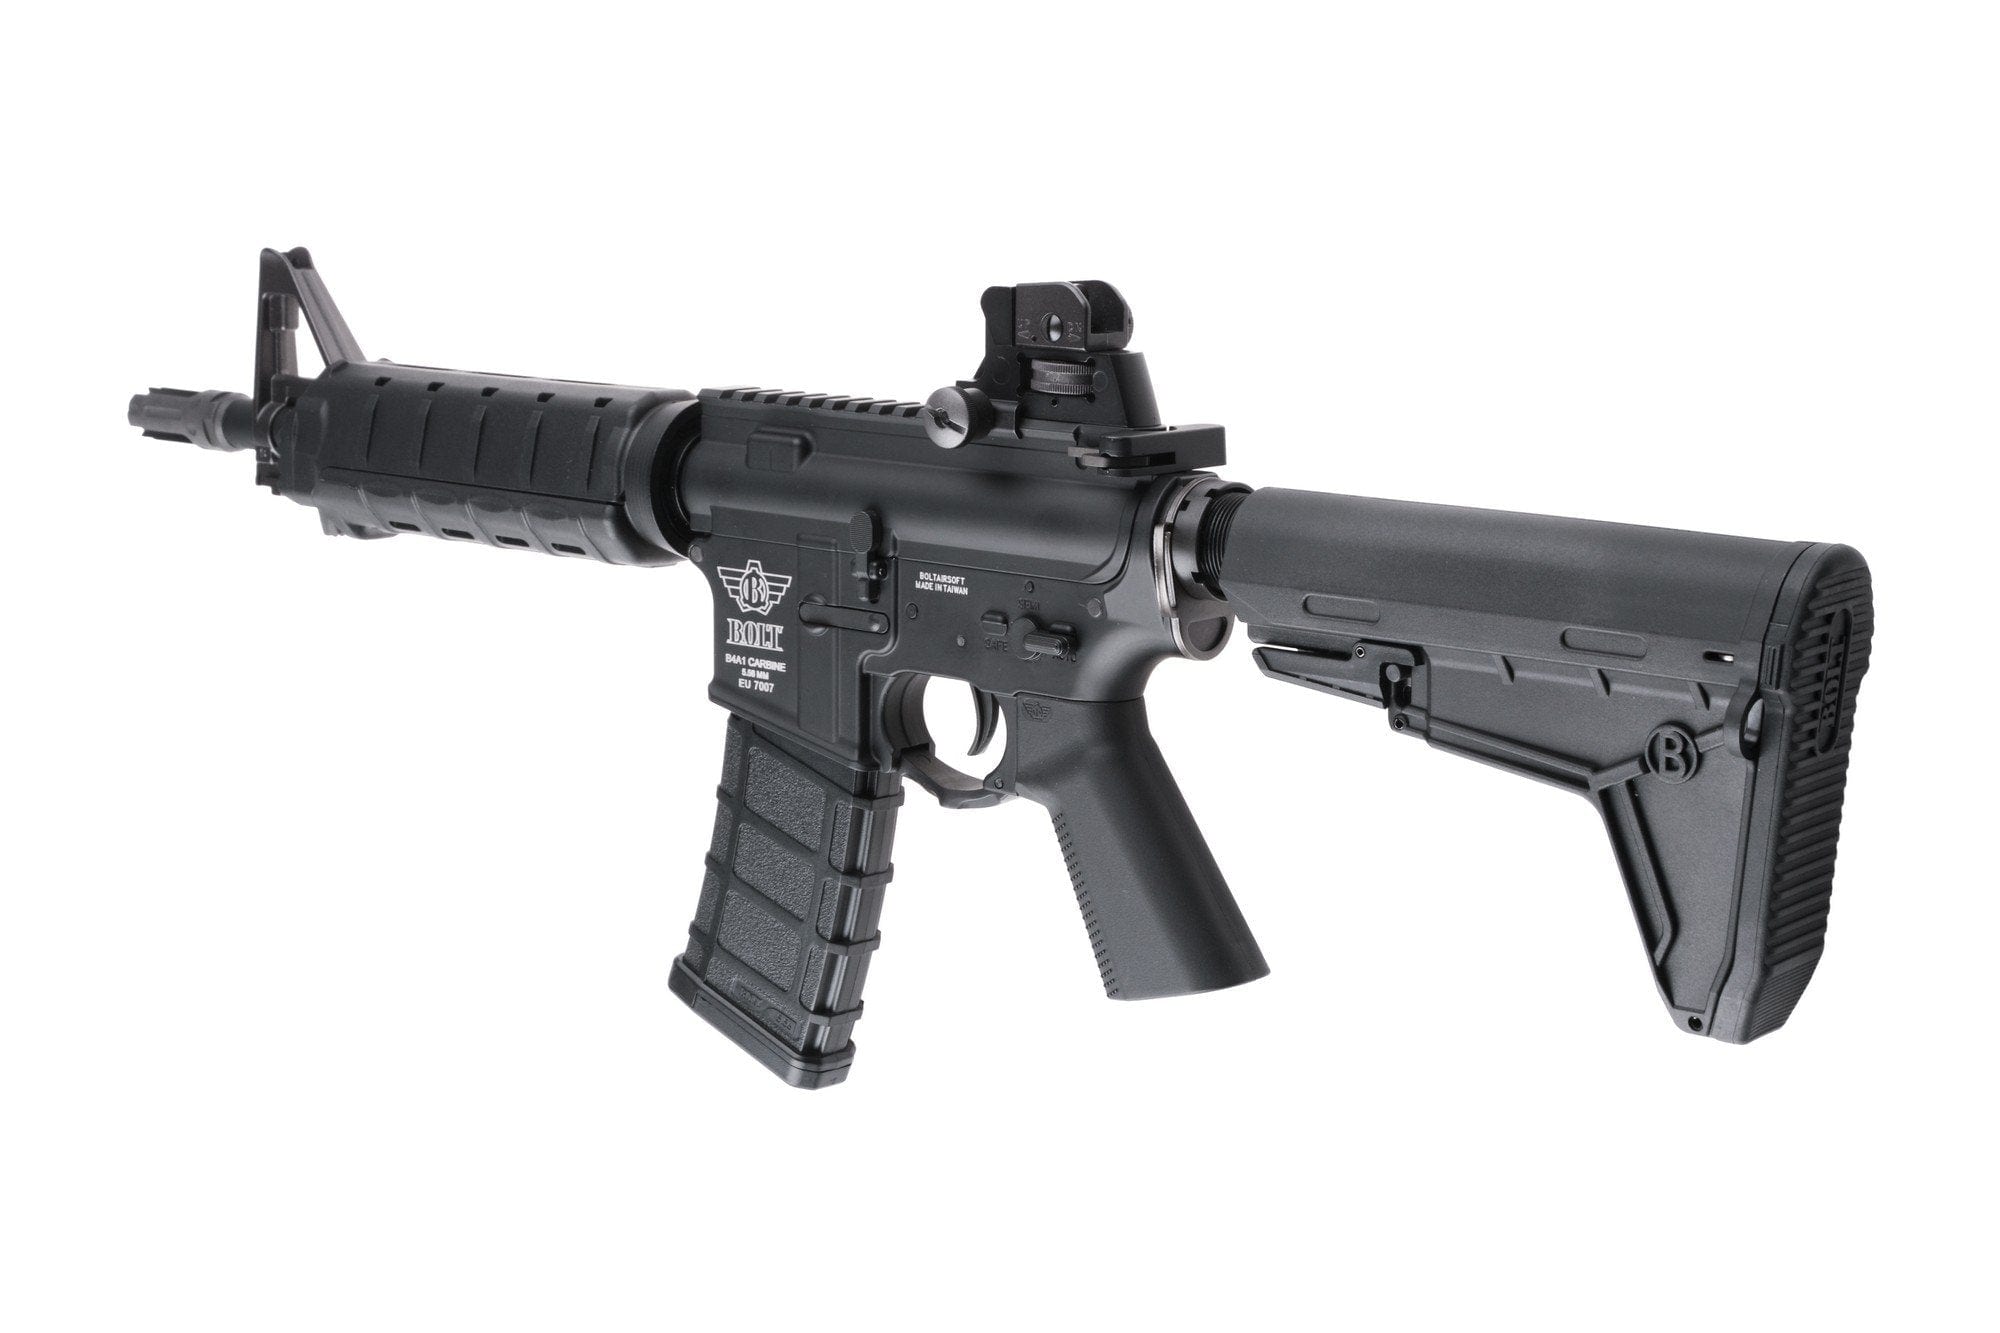 B4A1 ELITE SD (B.R.S.S.) Airsoft Carbine - Black by BOLT on Airsoft Mania Europe